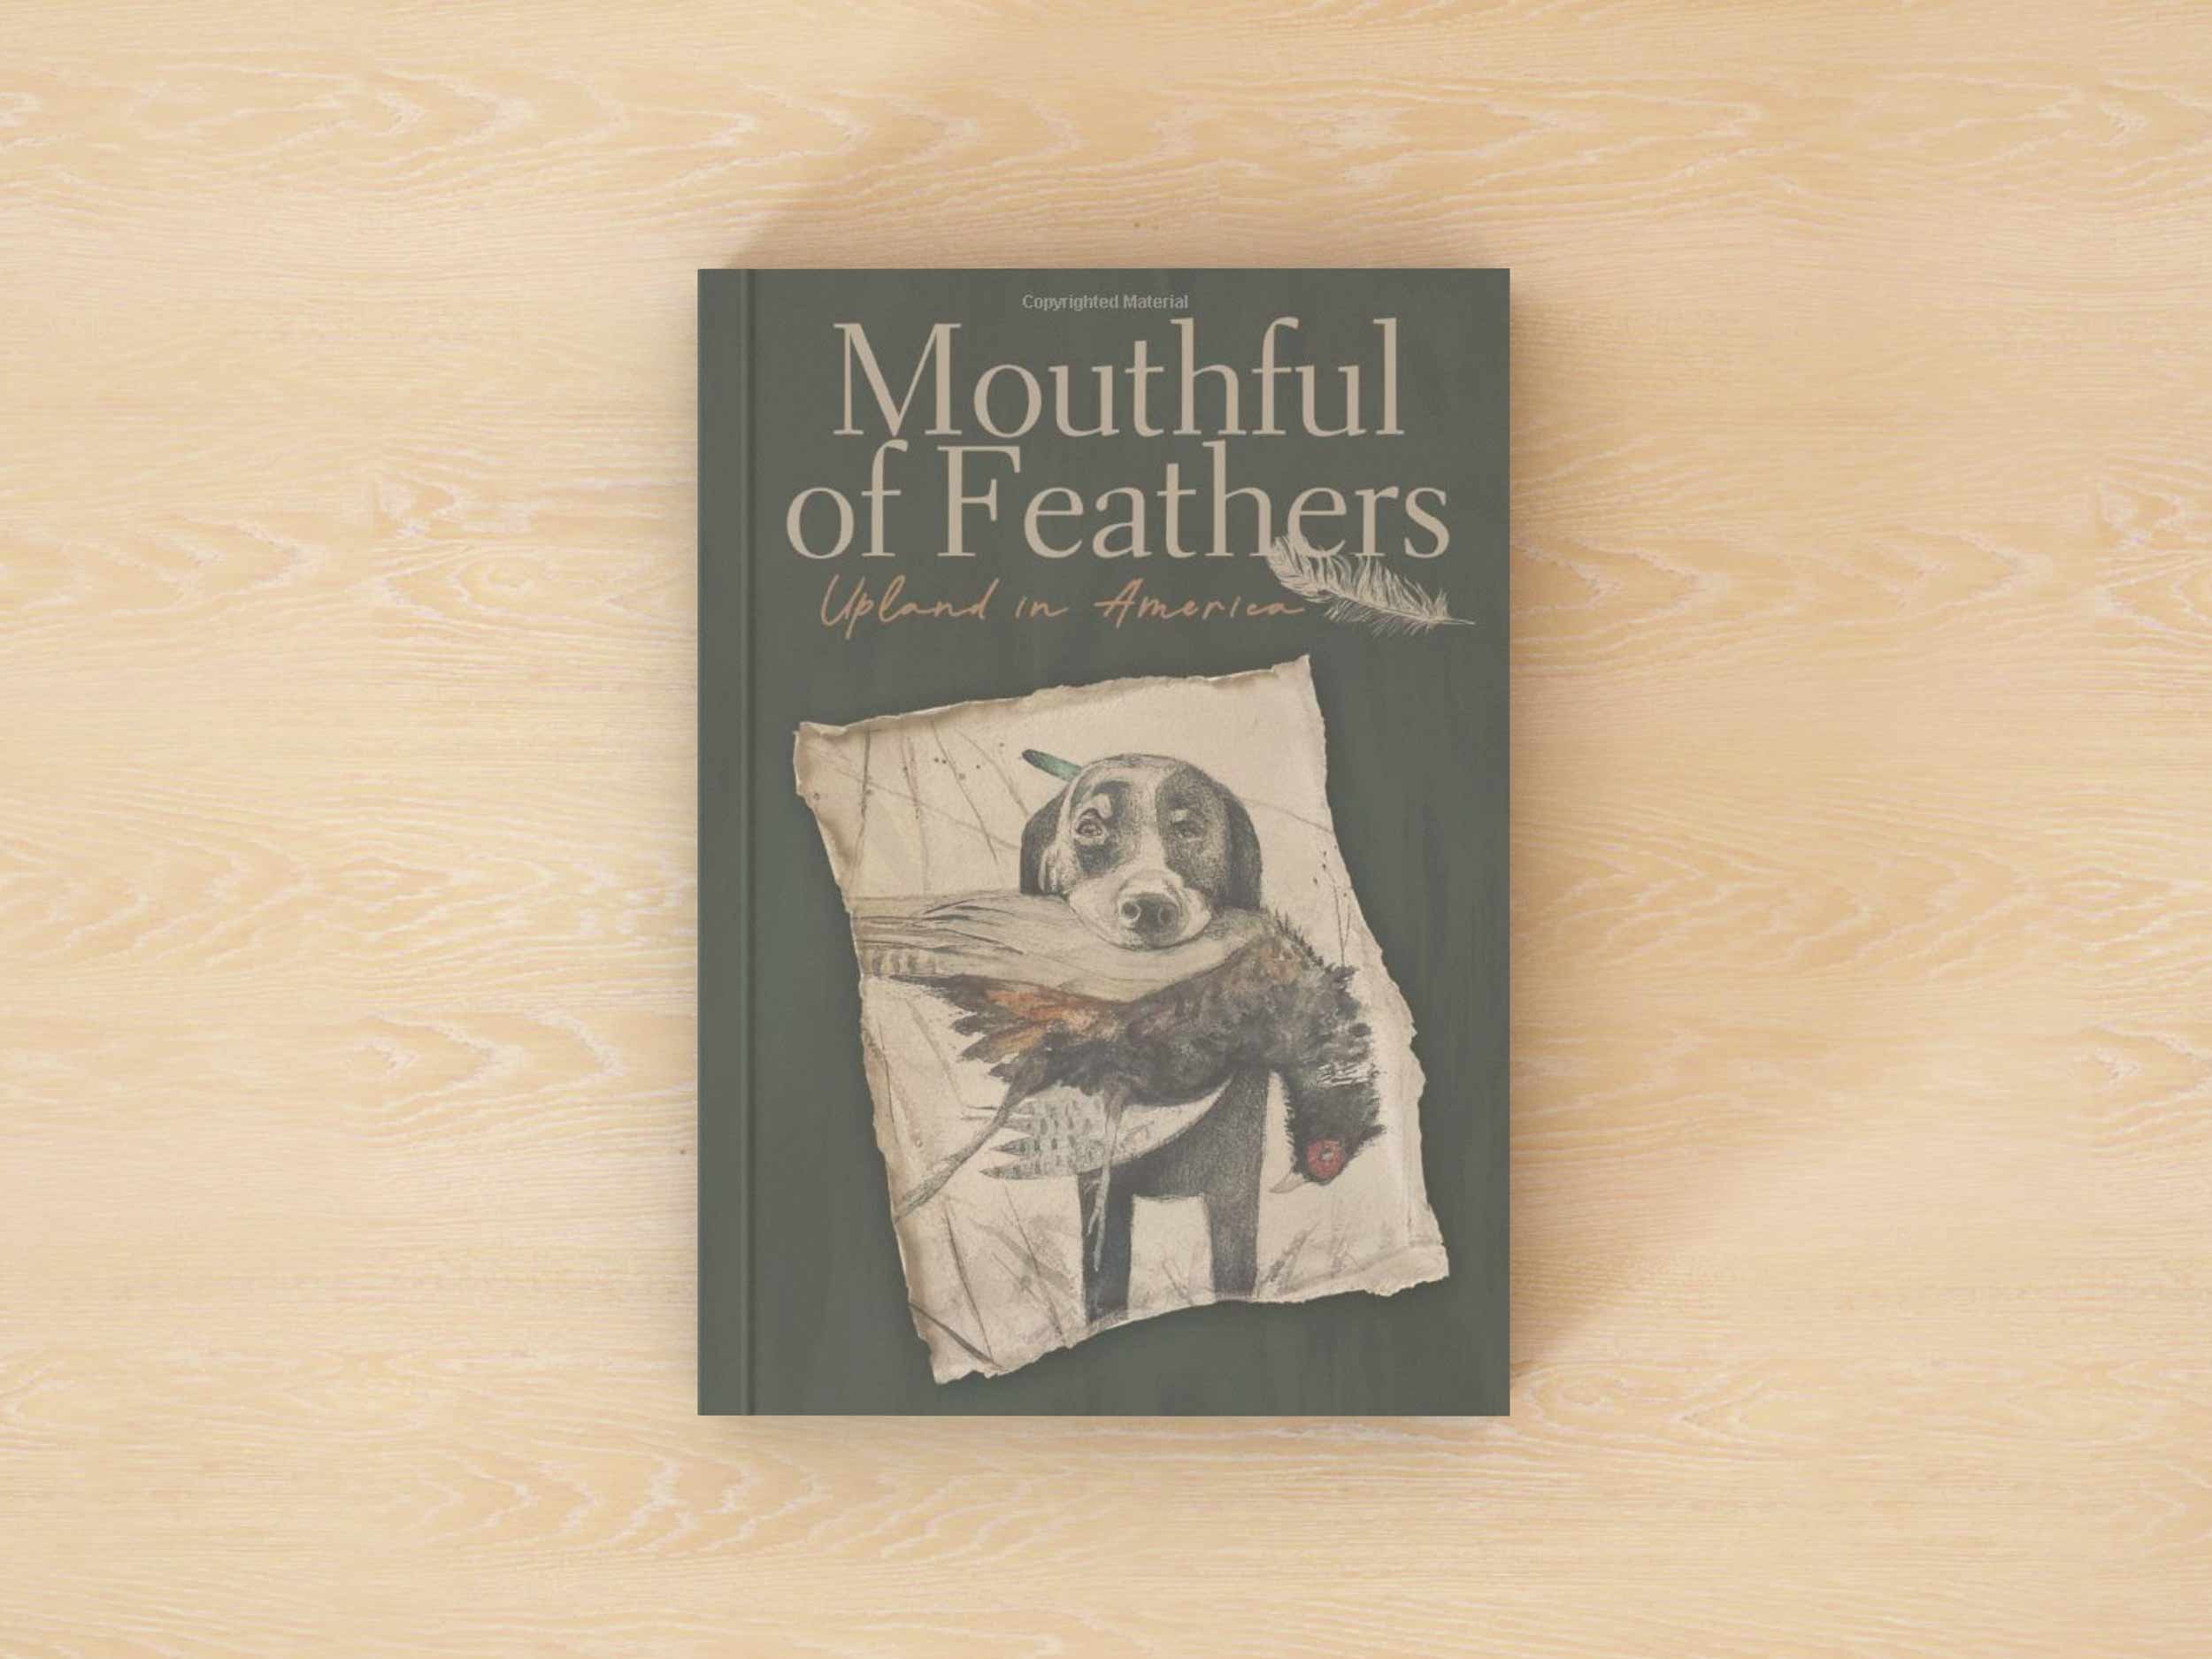 Mouthful-of-Feathers-banner-on-wood.jpg